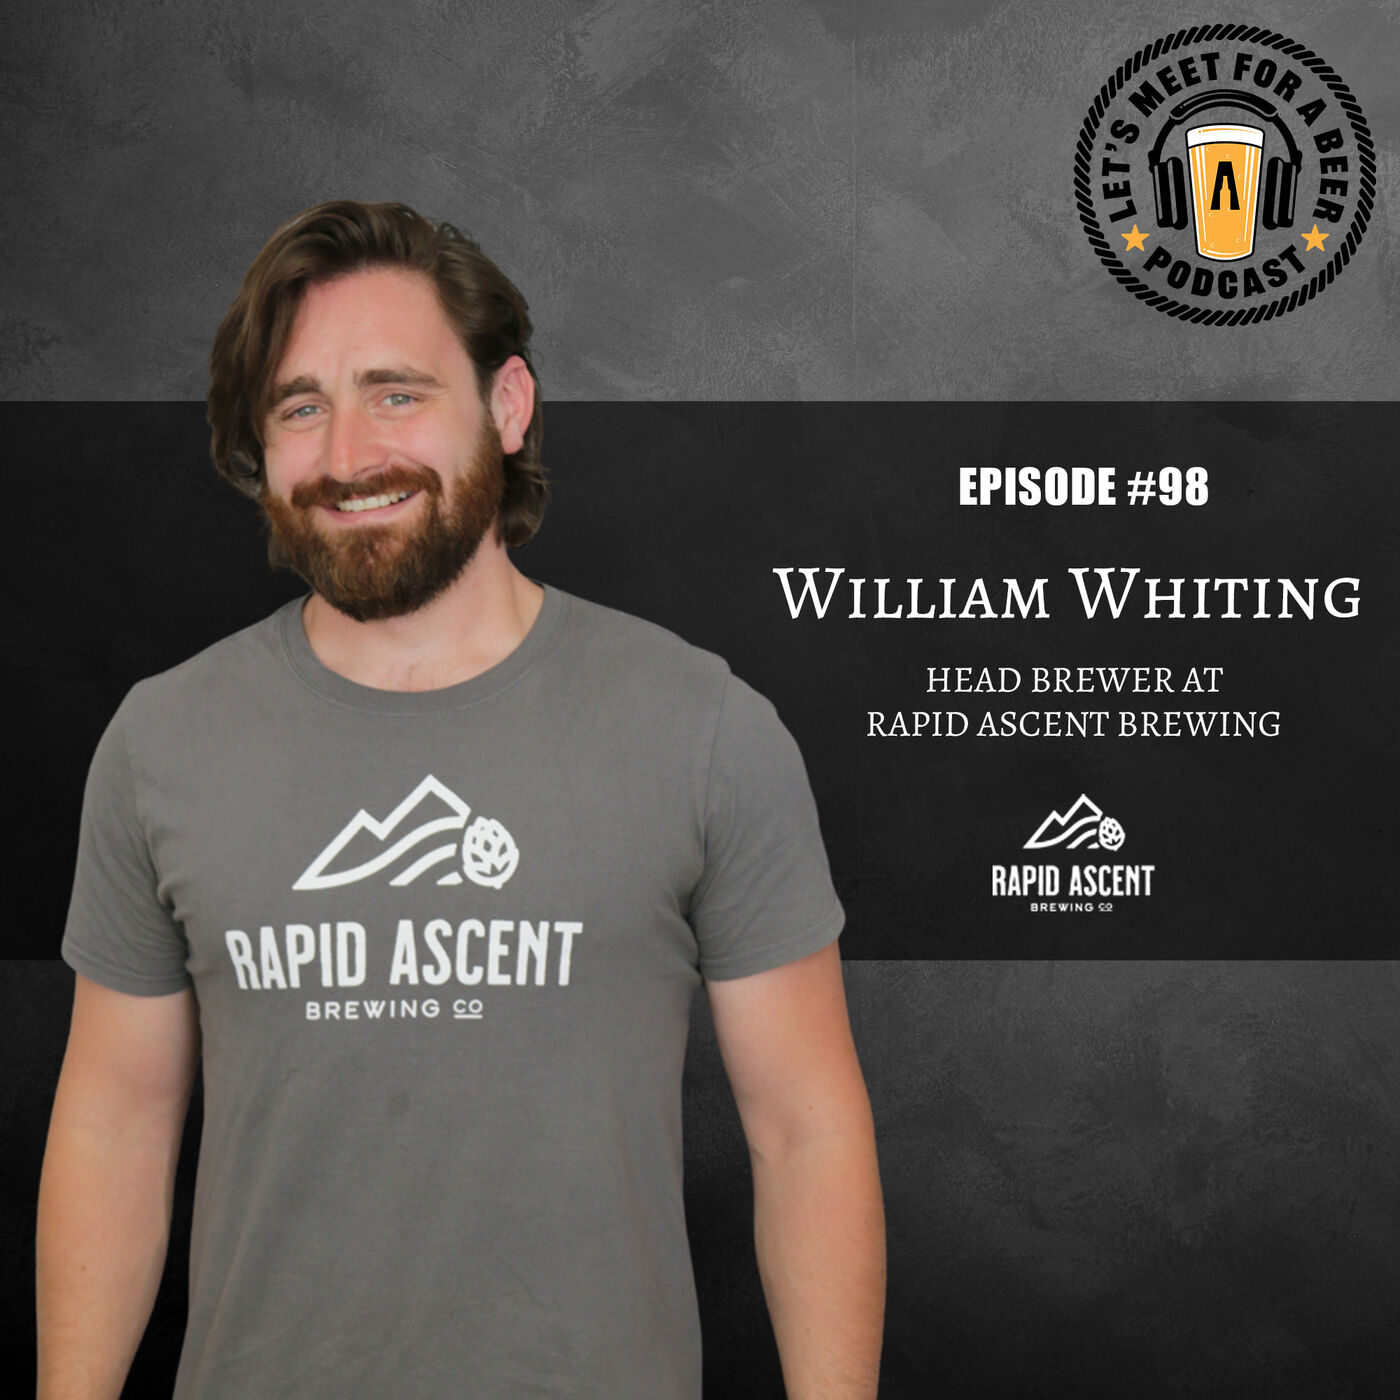 Episode #98 with William Whiting, Head Brewer of Rapid Ascent Brewing